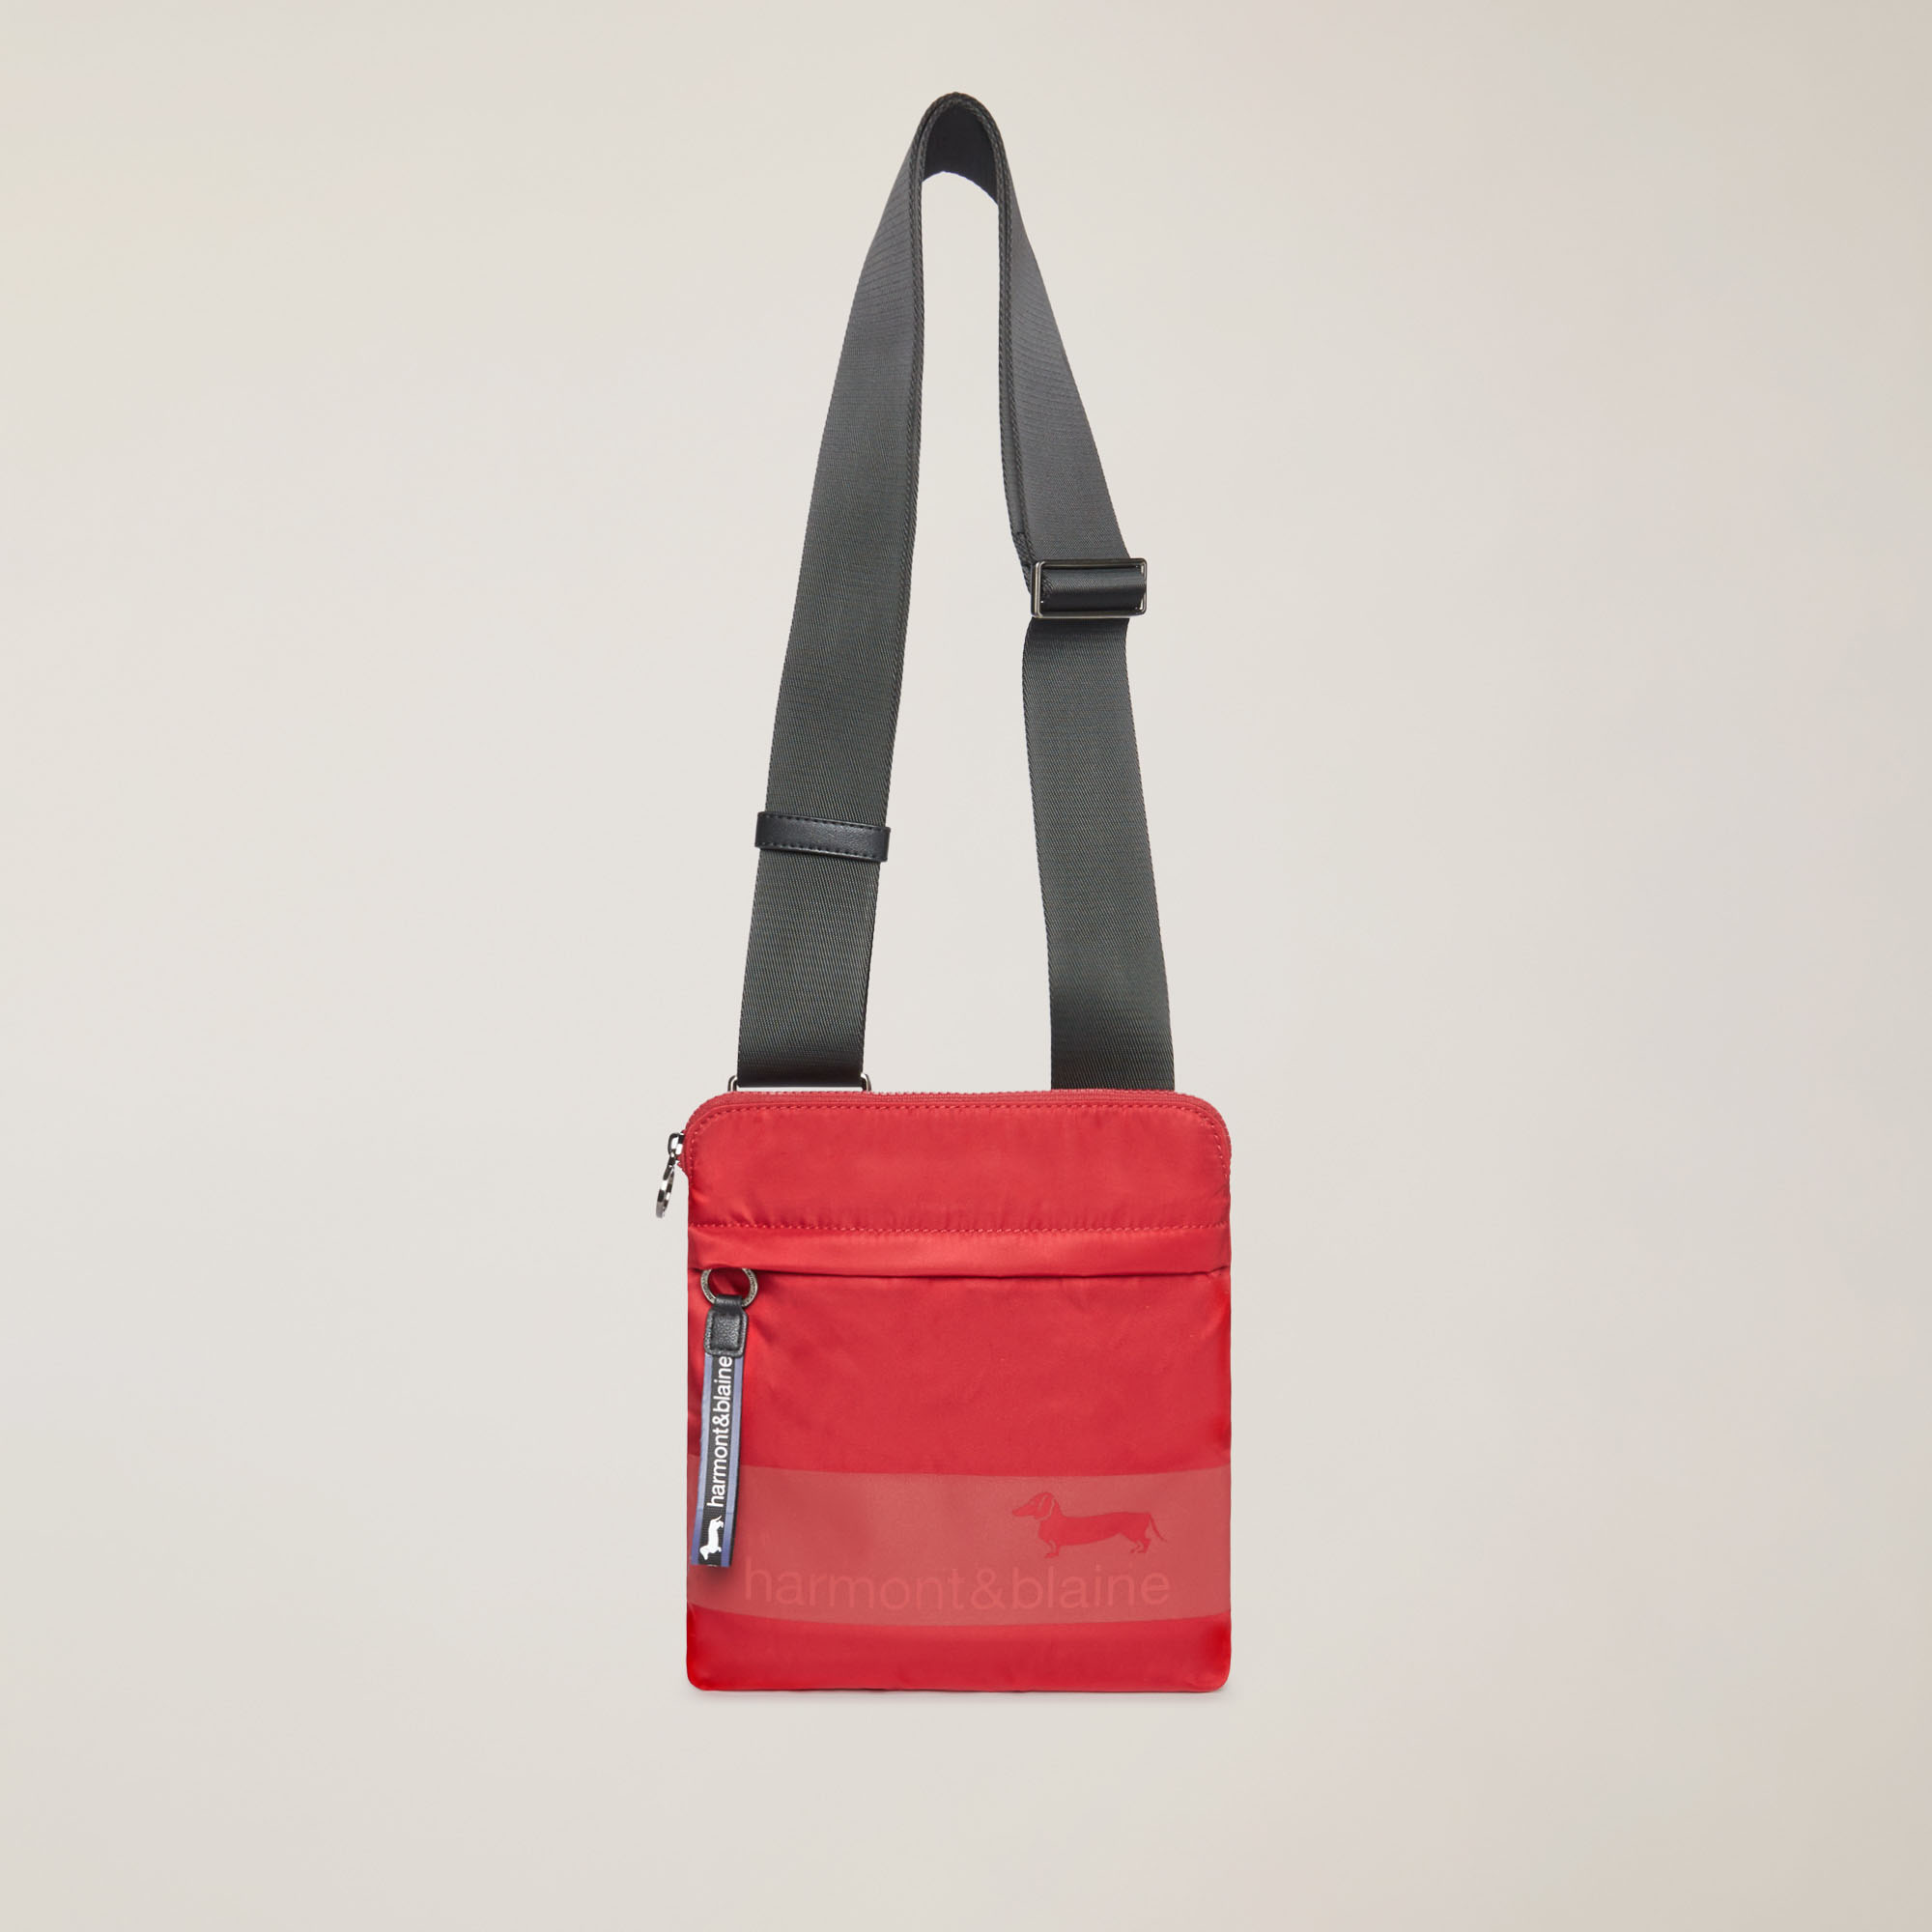 Borsa A Tracolla Con Logo, Rosso, large image number 0